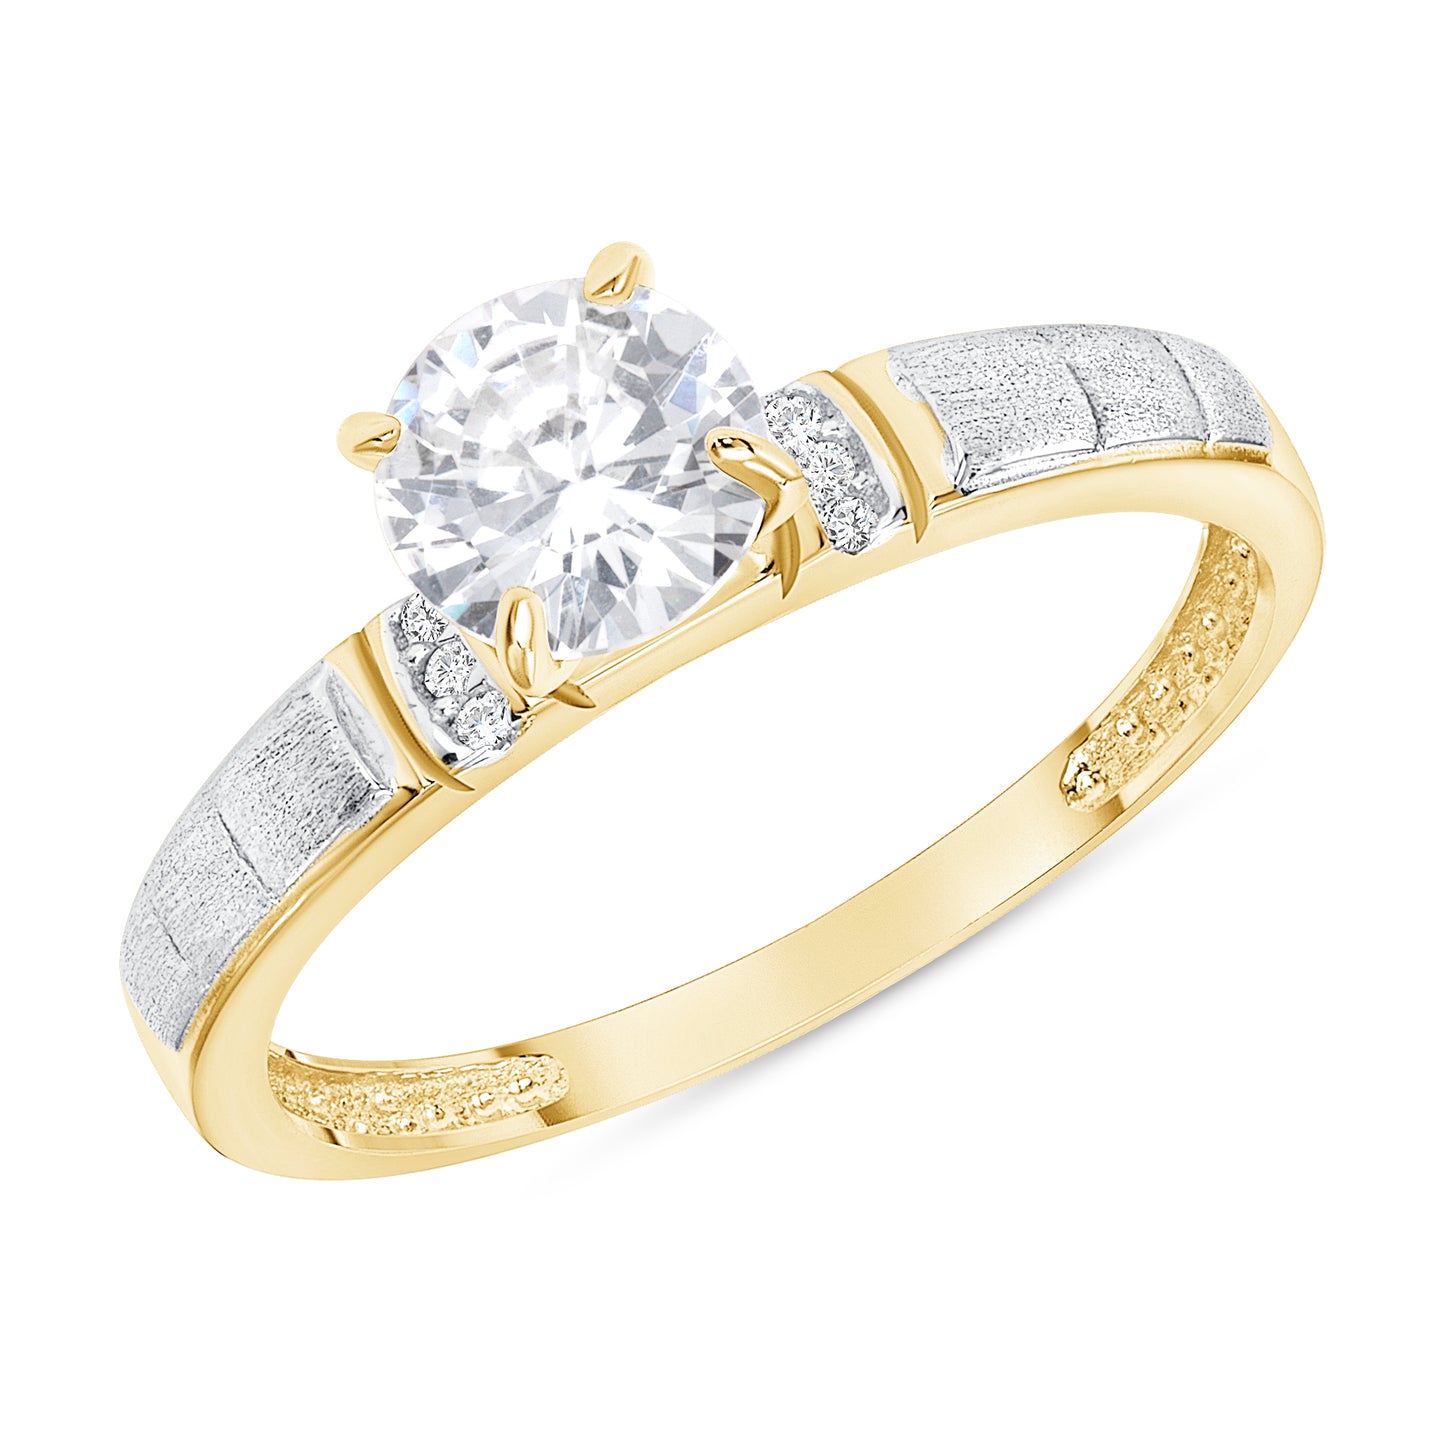 Silver 925 2 Tone Bridal Gold Plated Ring DGR2074